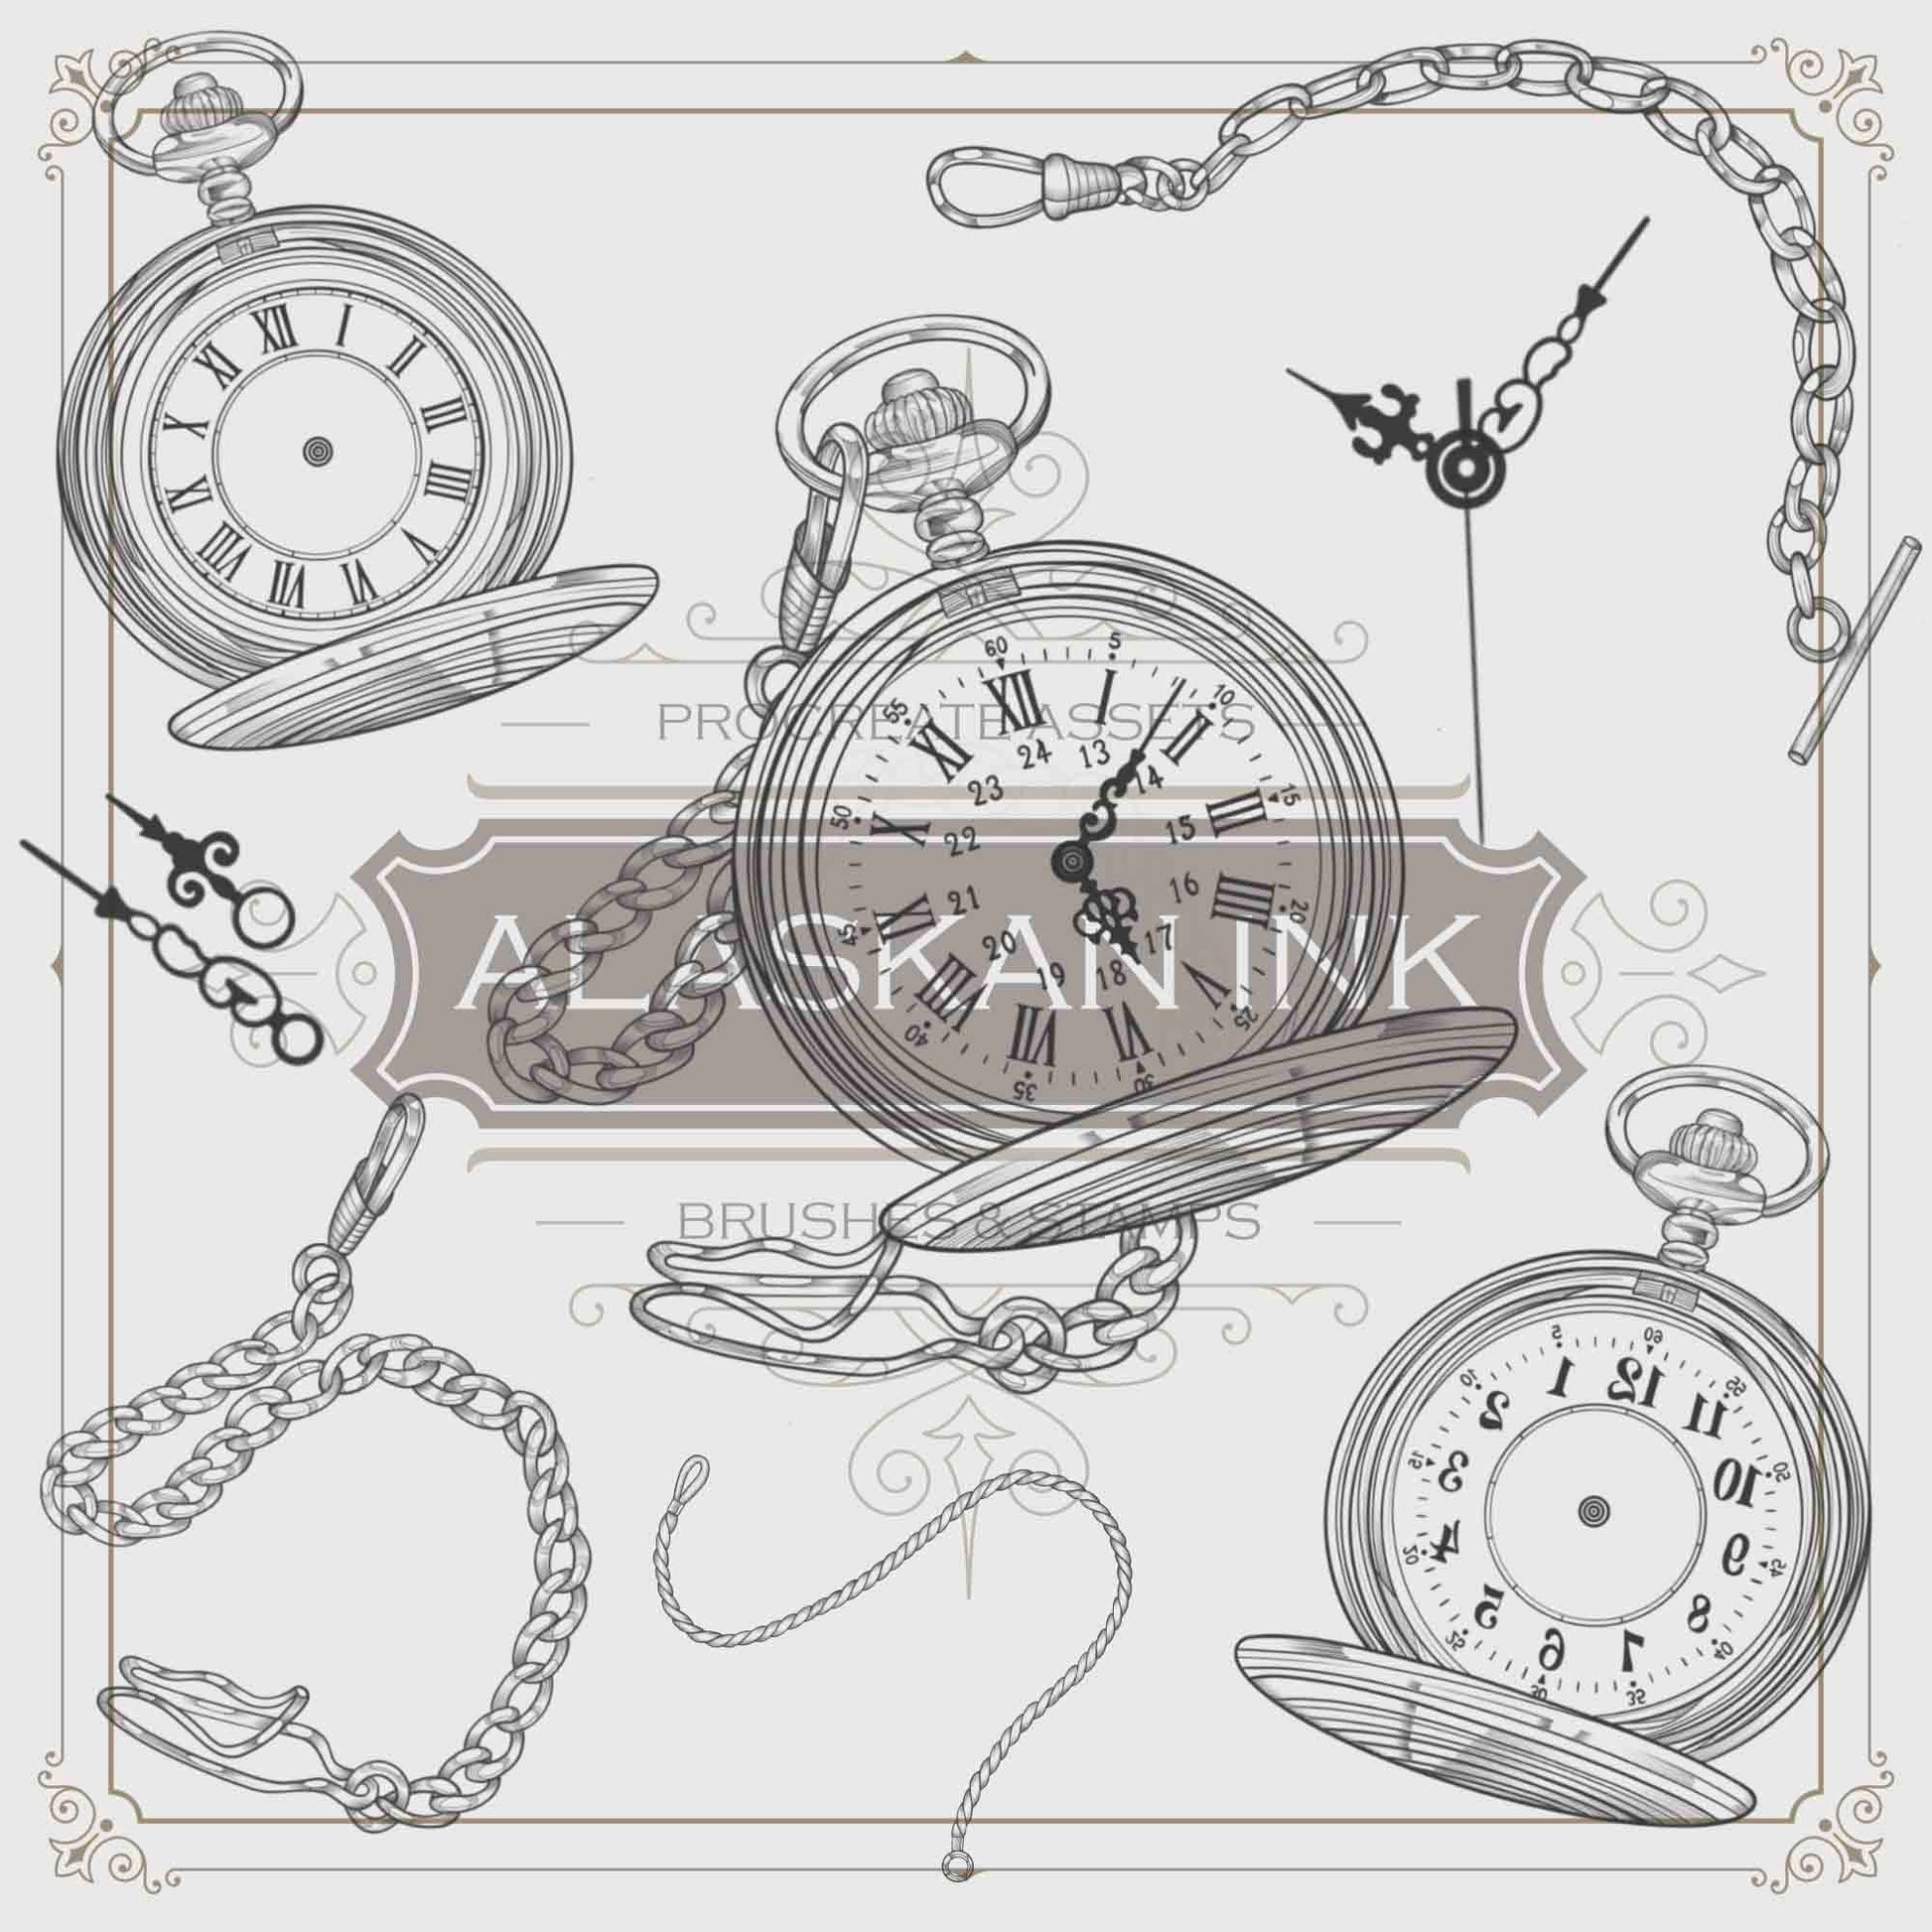 50 Pocket Watch Tattoo Brushes for Procreate application iPad and iPAd pro created by Tattoo Artists 